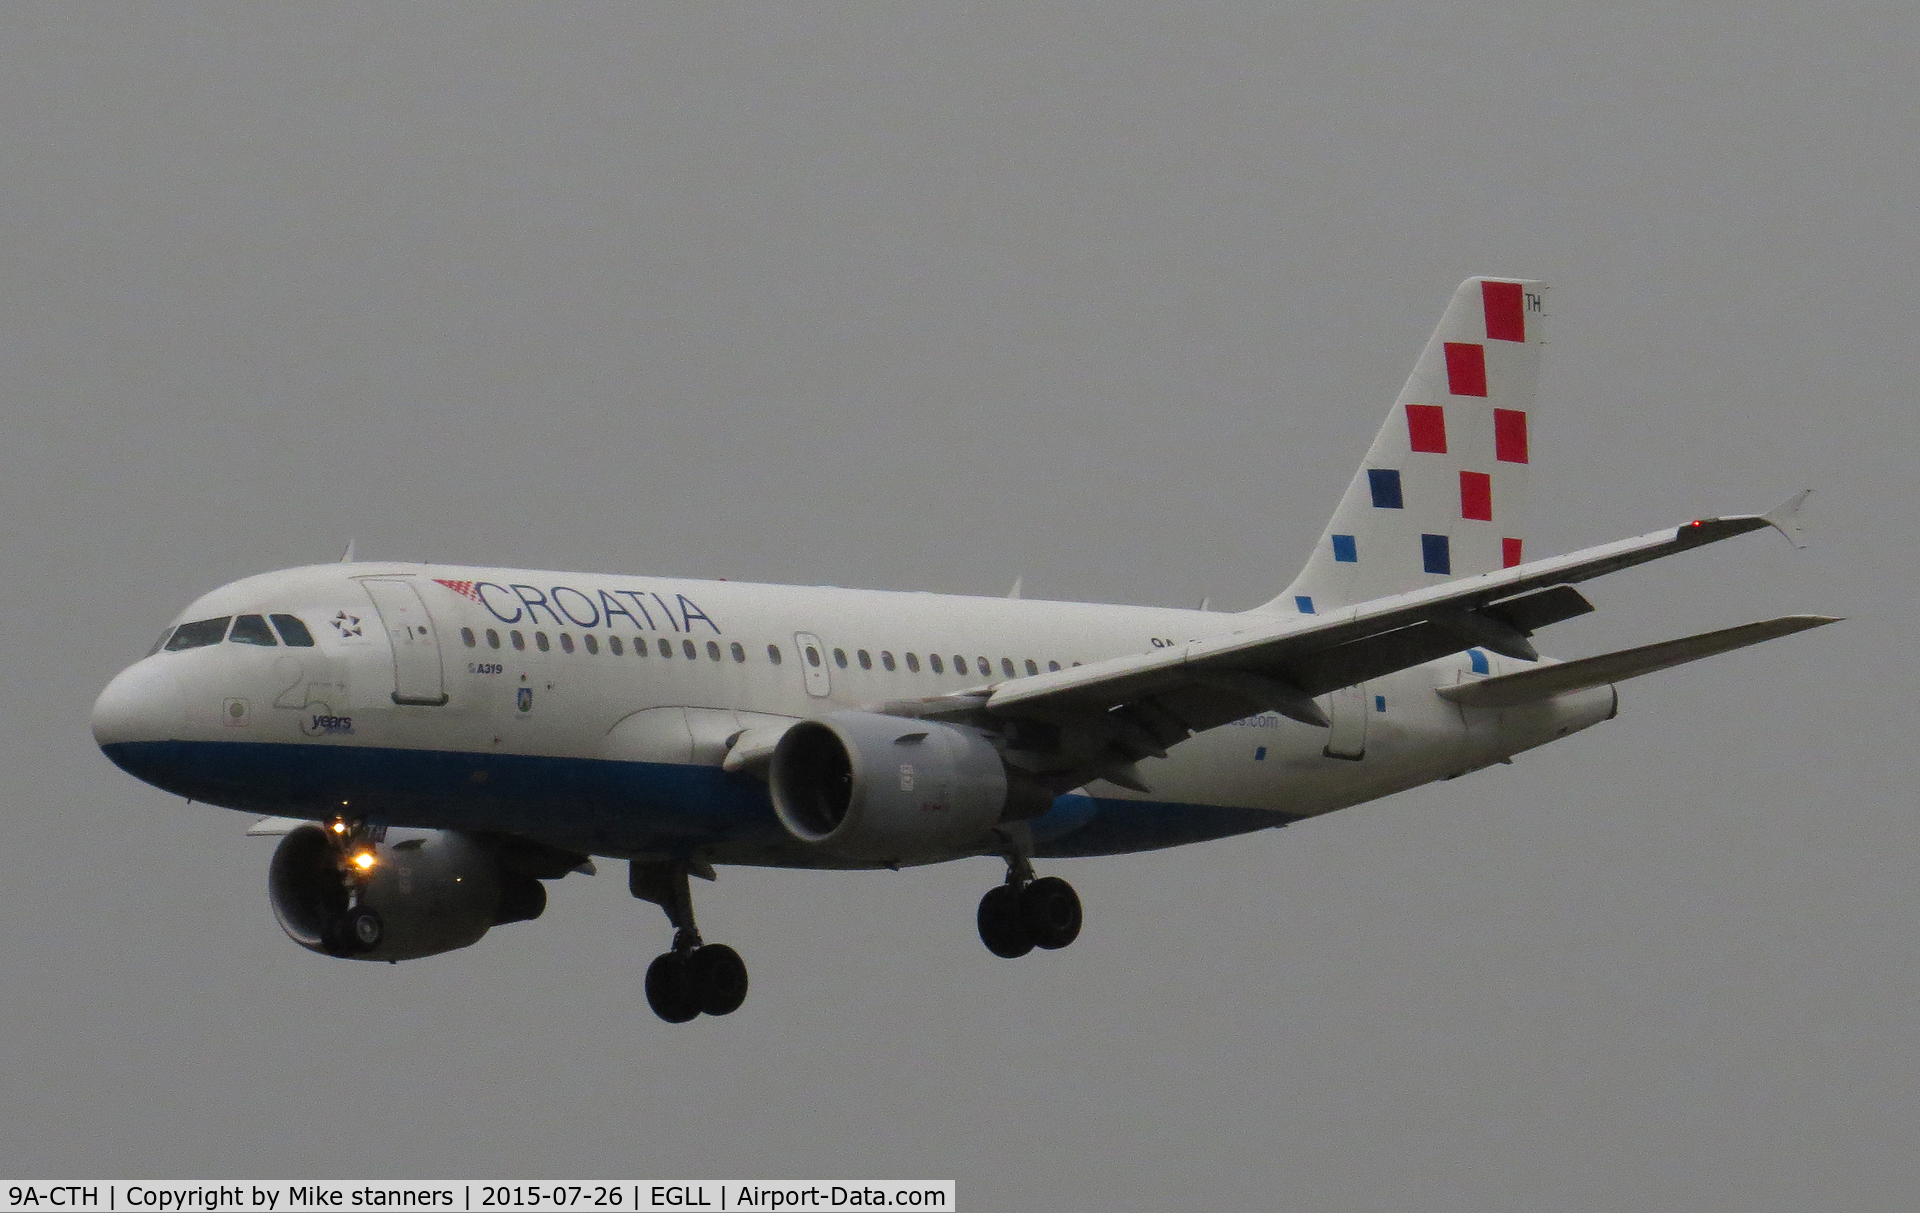 9A-CTH, 1998 Airbus A319-112 C/N 833, Croatia Airlines A319 -112 Landing runway 09R from ZAG,LHR 26.7.15